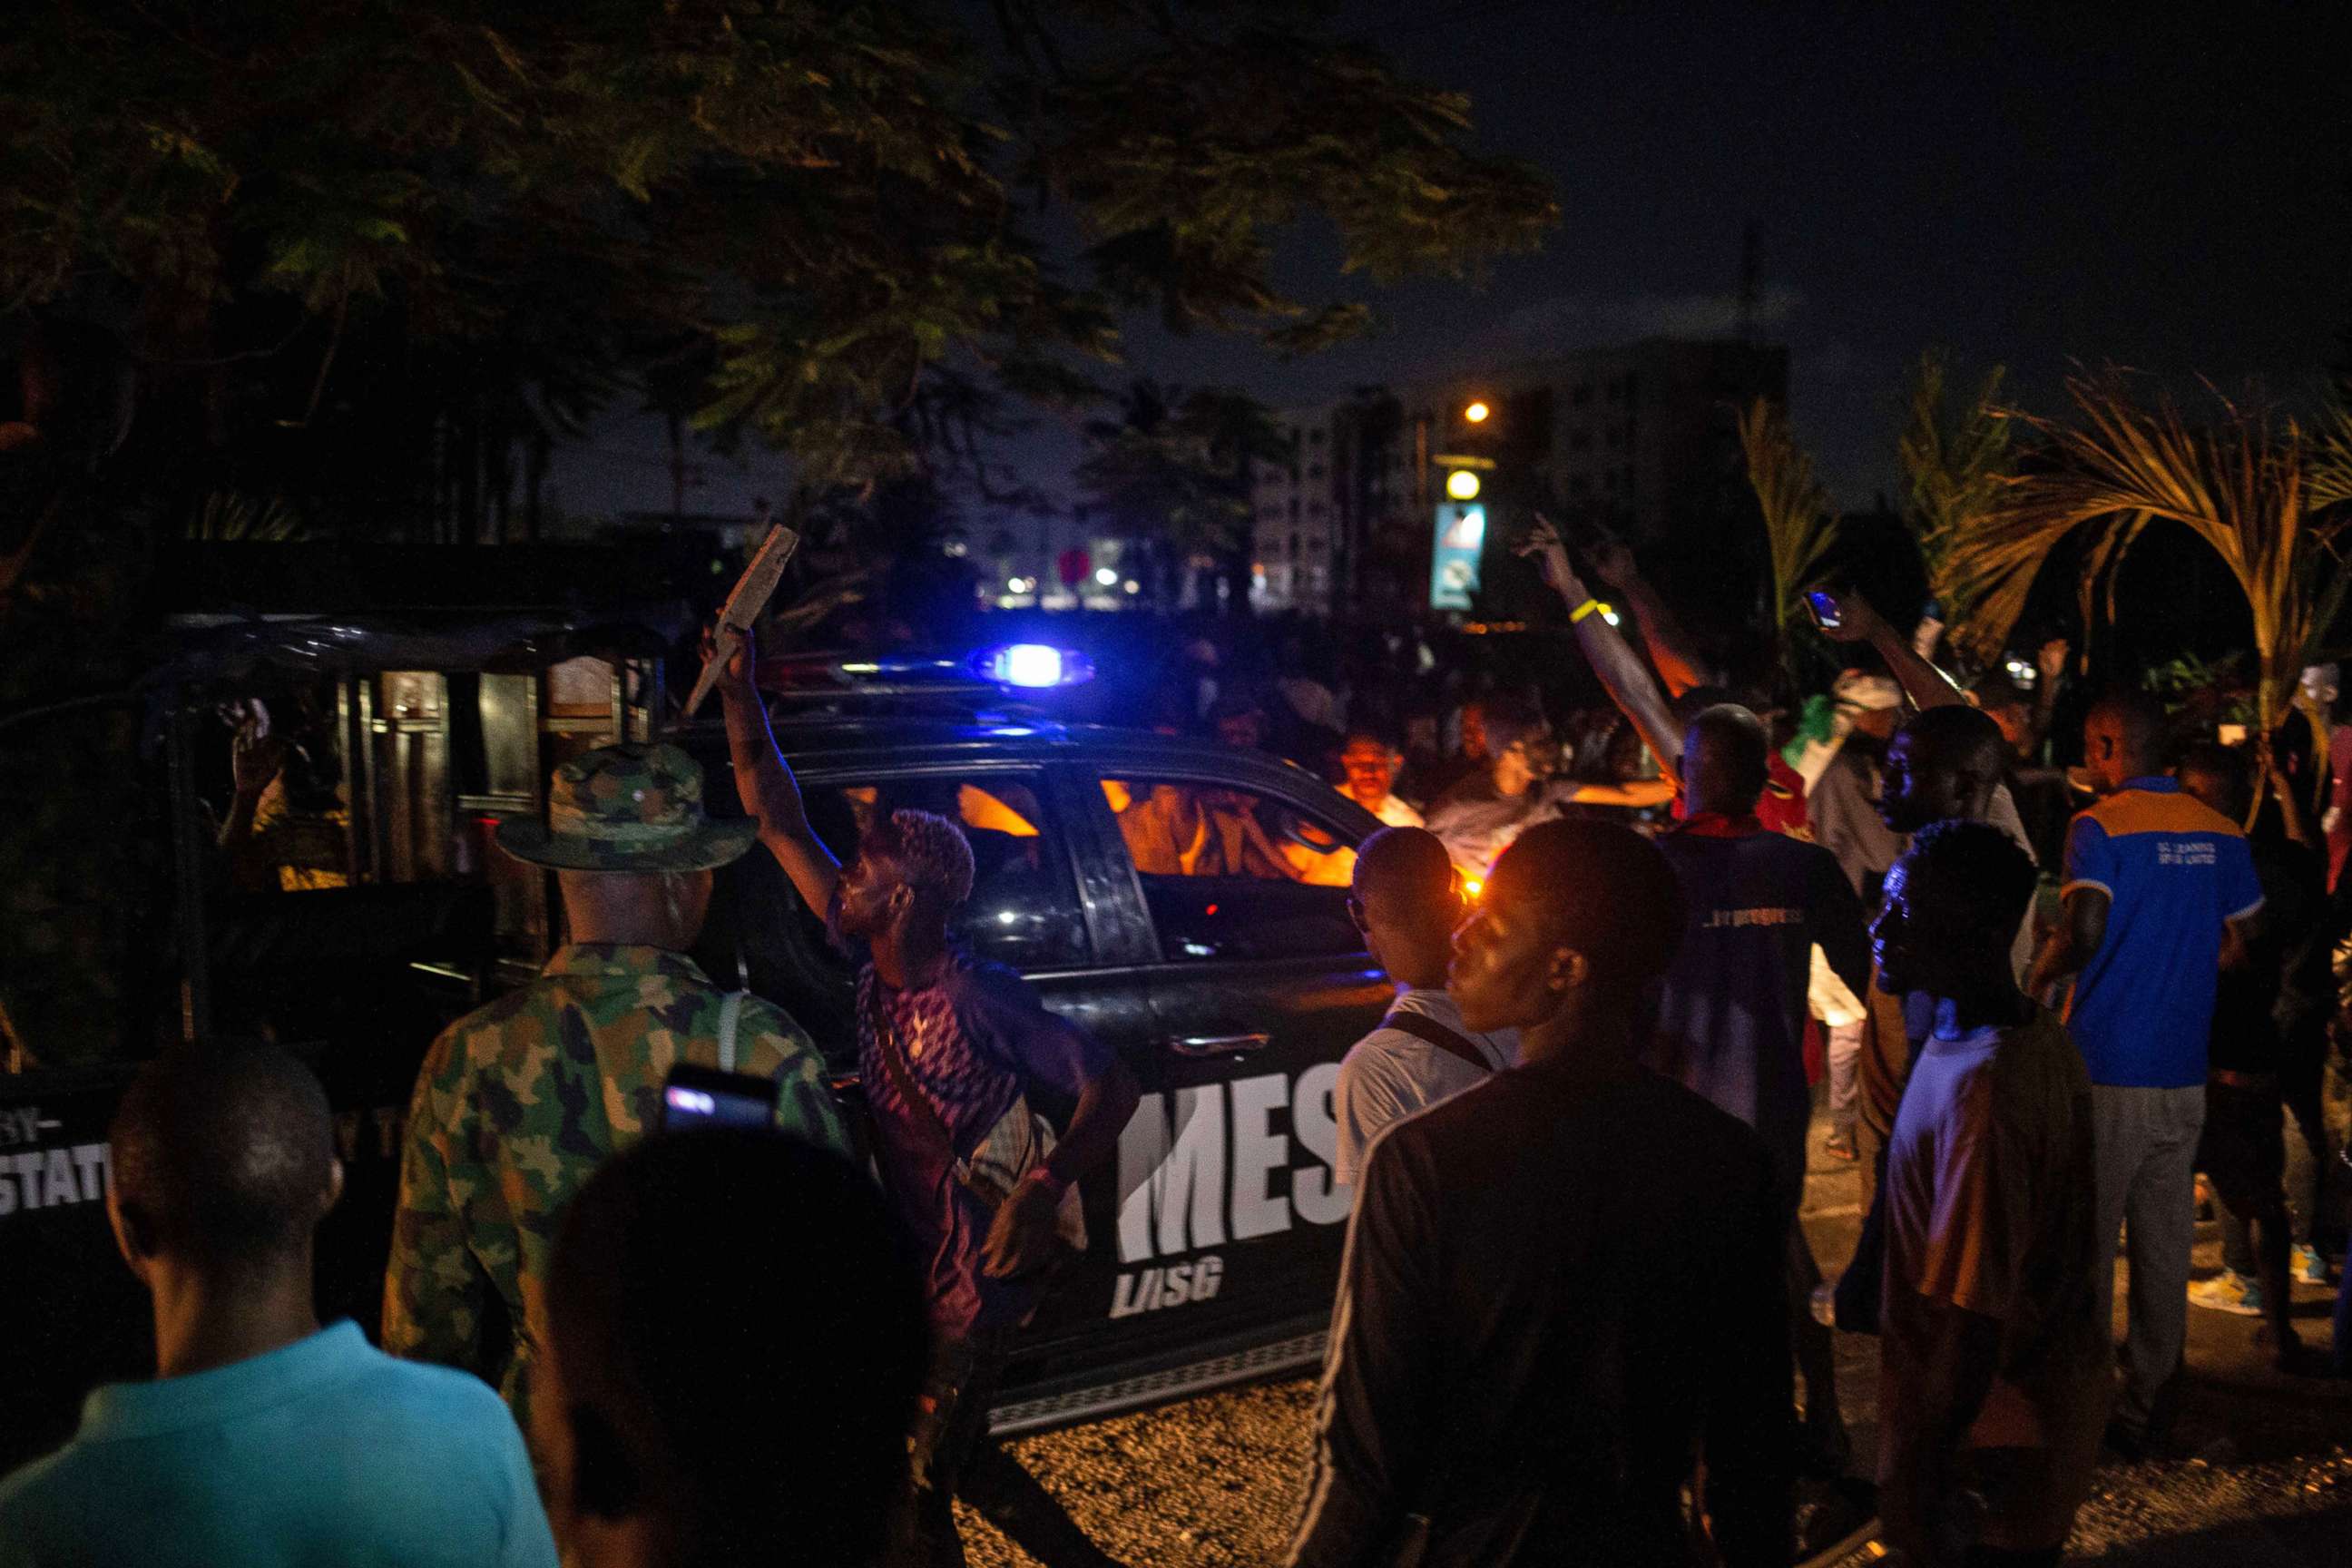 PHOTO: A patrol car of the Lagos State Security drives through Nigerian protesters demonstrating in the streets of Alausa Ikeja on October 20, 2020, after the authorities declared an open-ended lock down in Lagos.